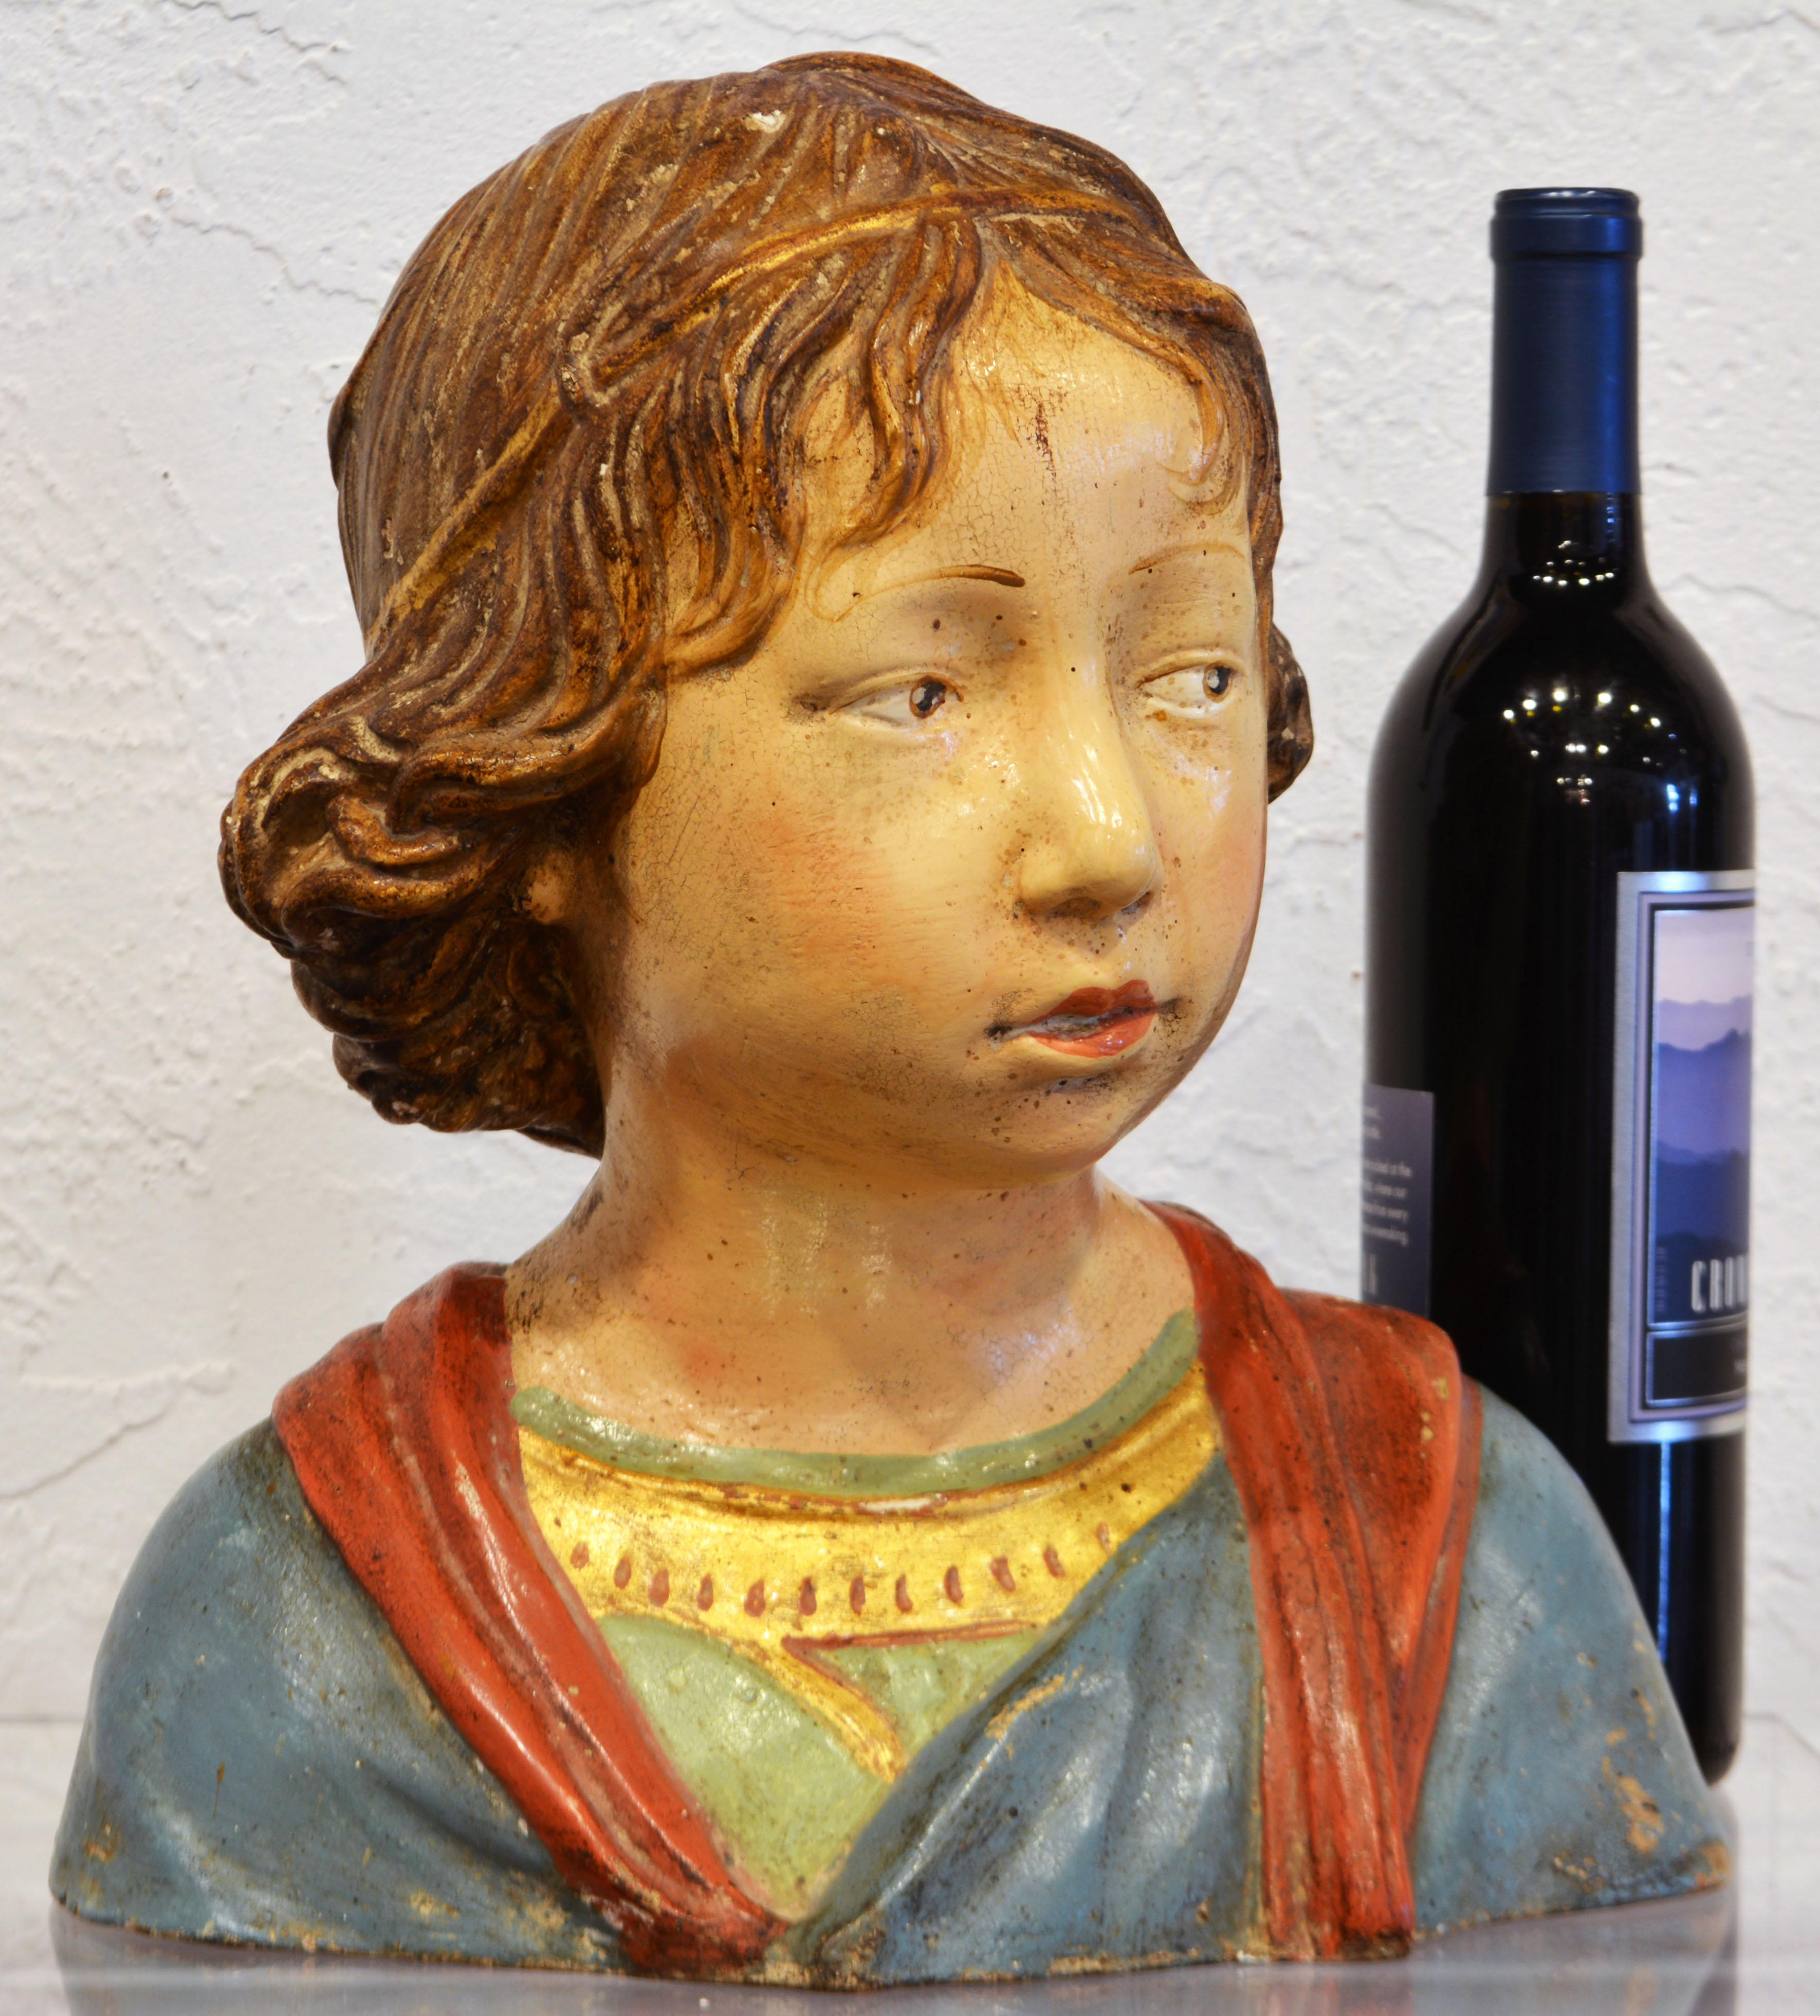 19th Century 19th C. Italian Terracotta Bust of a Young Boy After Andrea Della Robbia